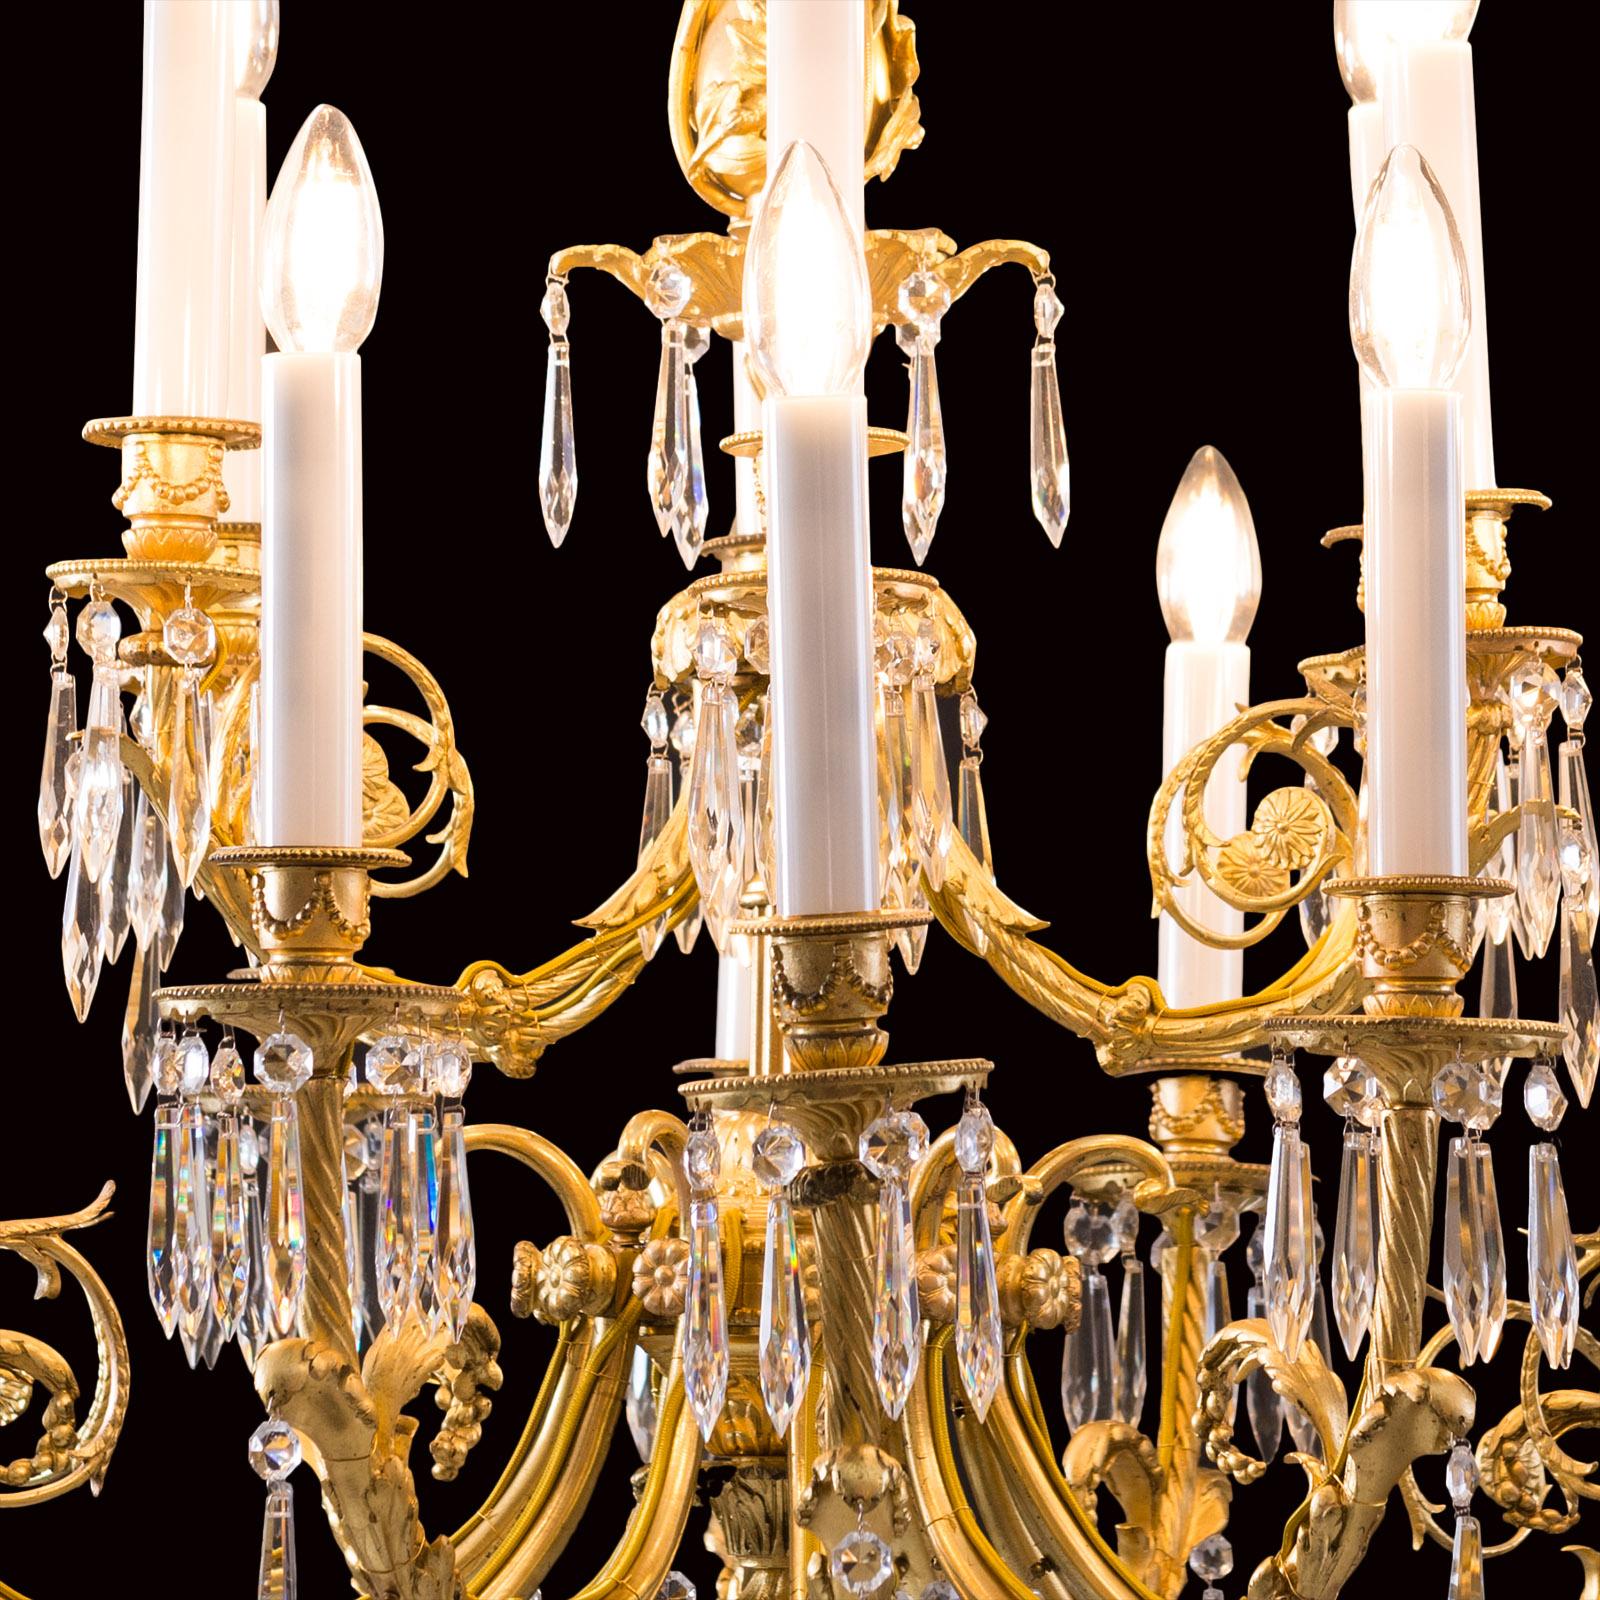 Original from 1880 Austro Hungary Baroque Style Chandelier, Gidet Brass In Good Condition For Sale In Vienna, AT